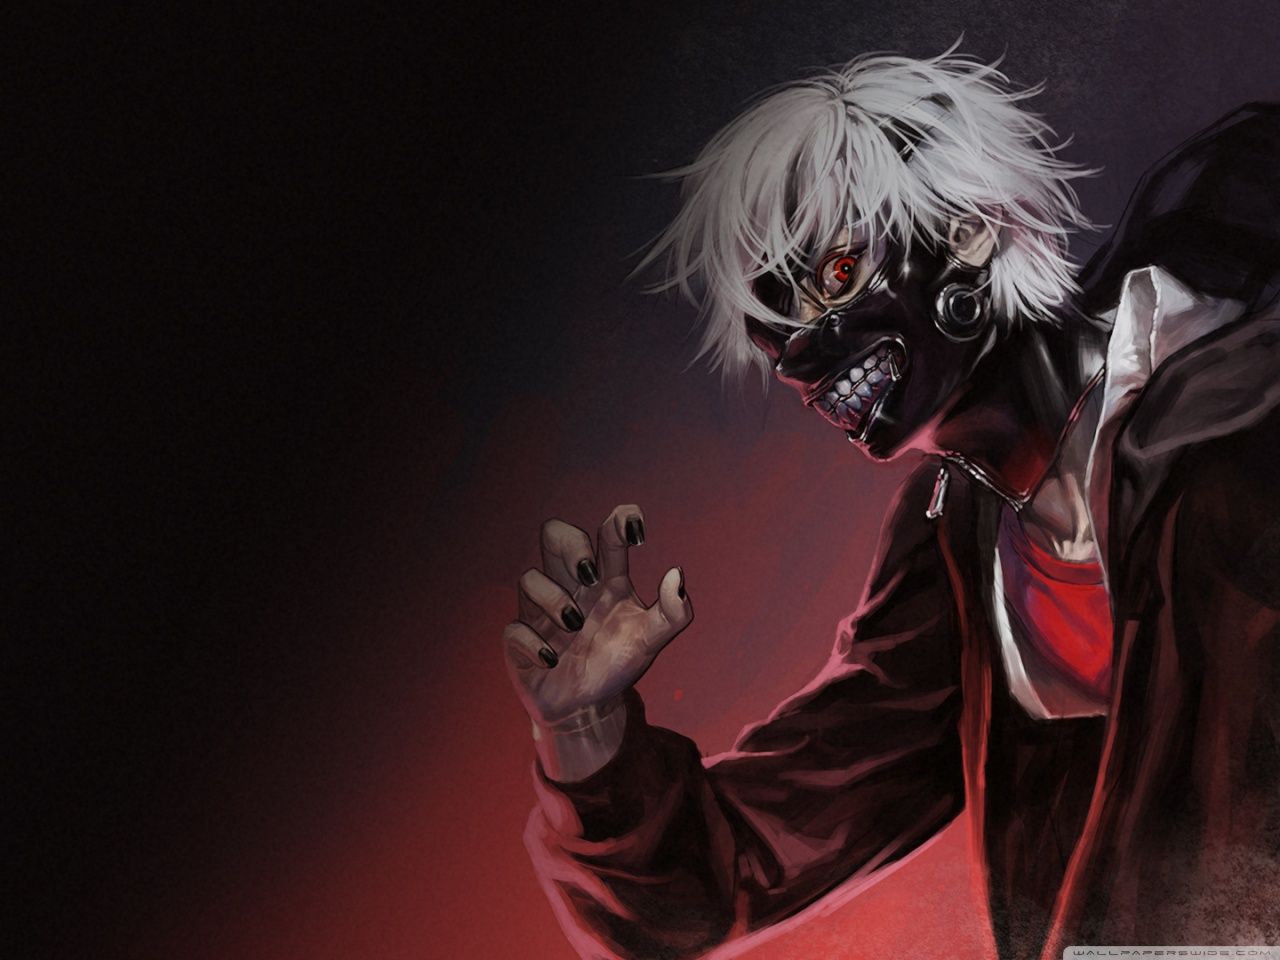 Tokyo Ghoul: re is a Japanese dark fantasy manga series written and illustrated by Sui Ishida. - Tokyo Ghoul